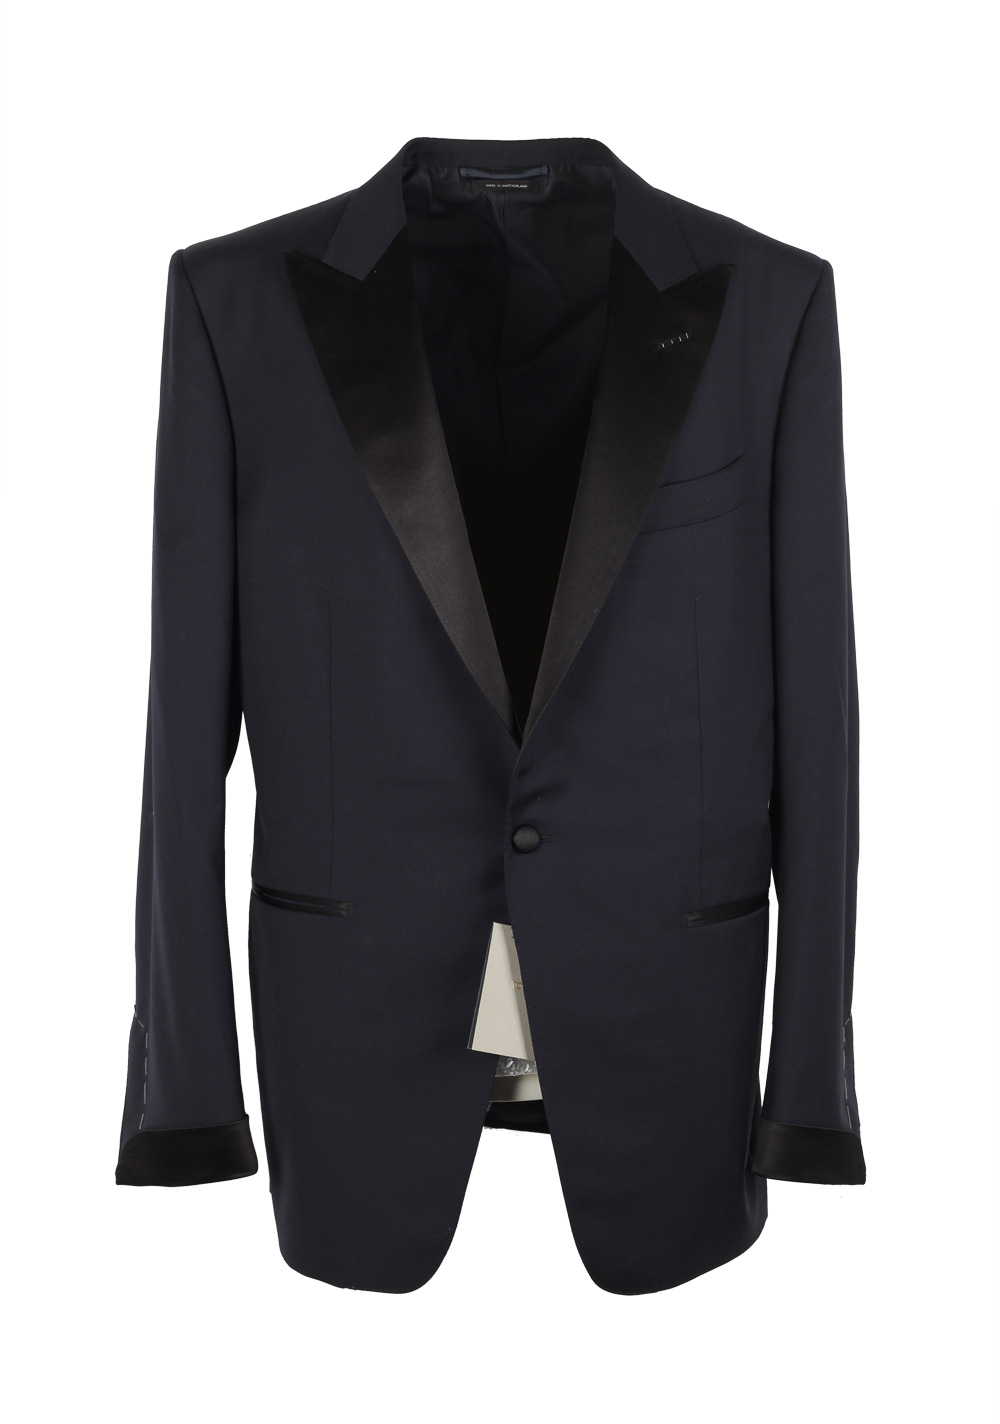 TOM FORD O’Connor Midnight Blue Tuxedo Smoking Suit Size 54 / 44R U.S ...